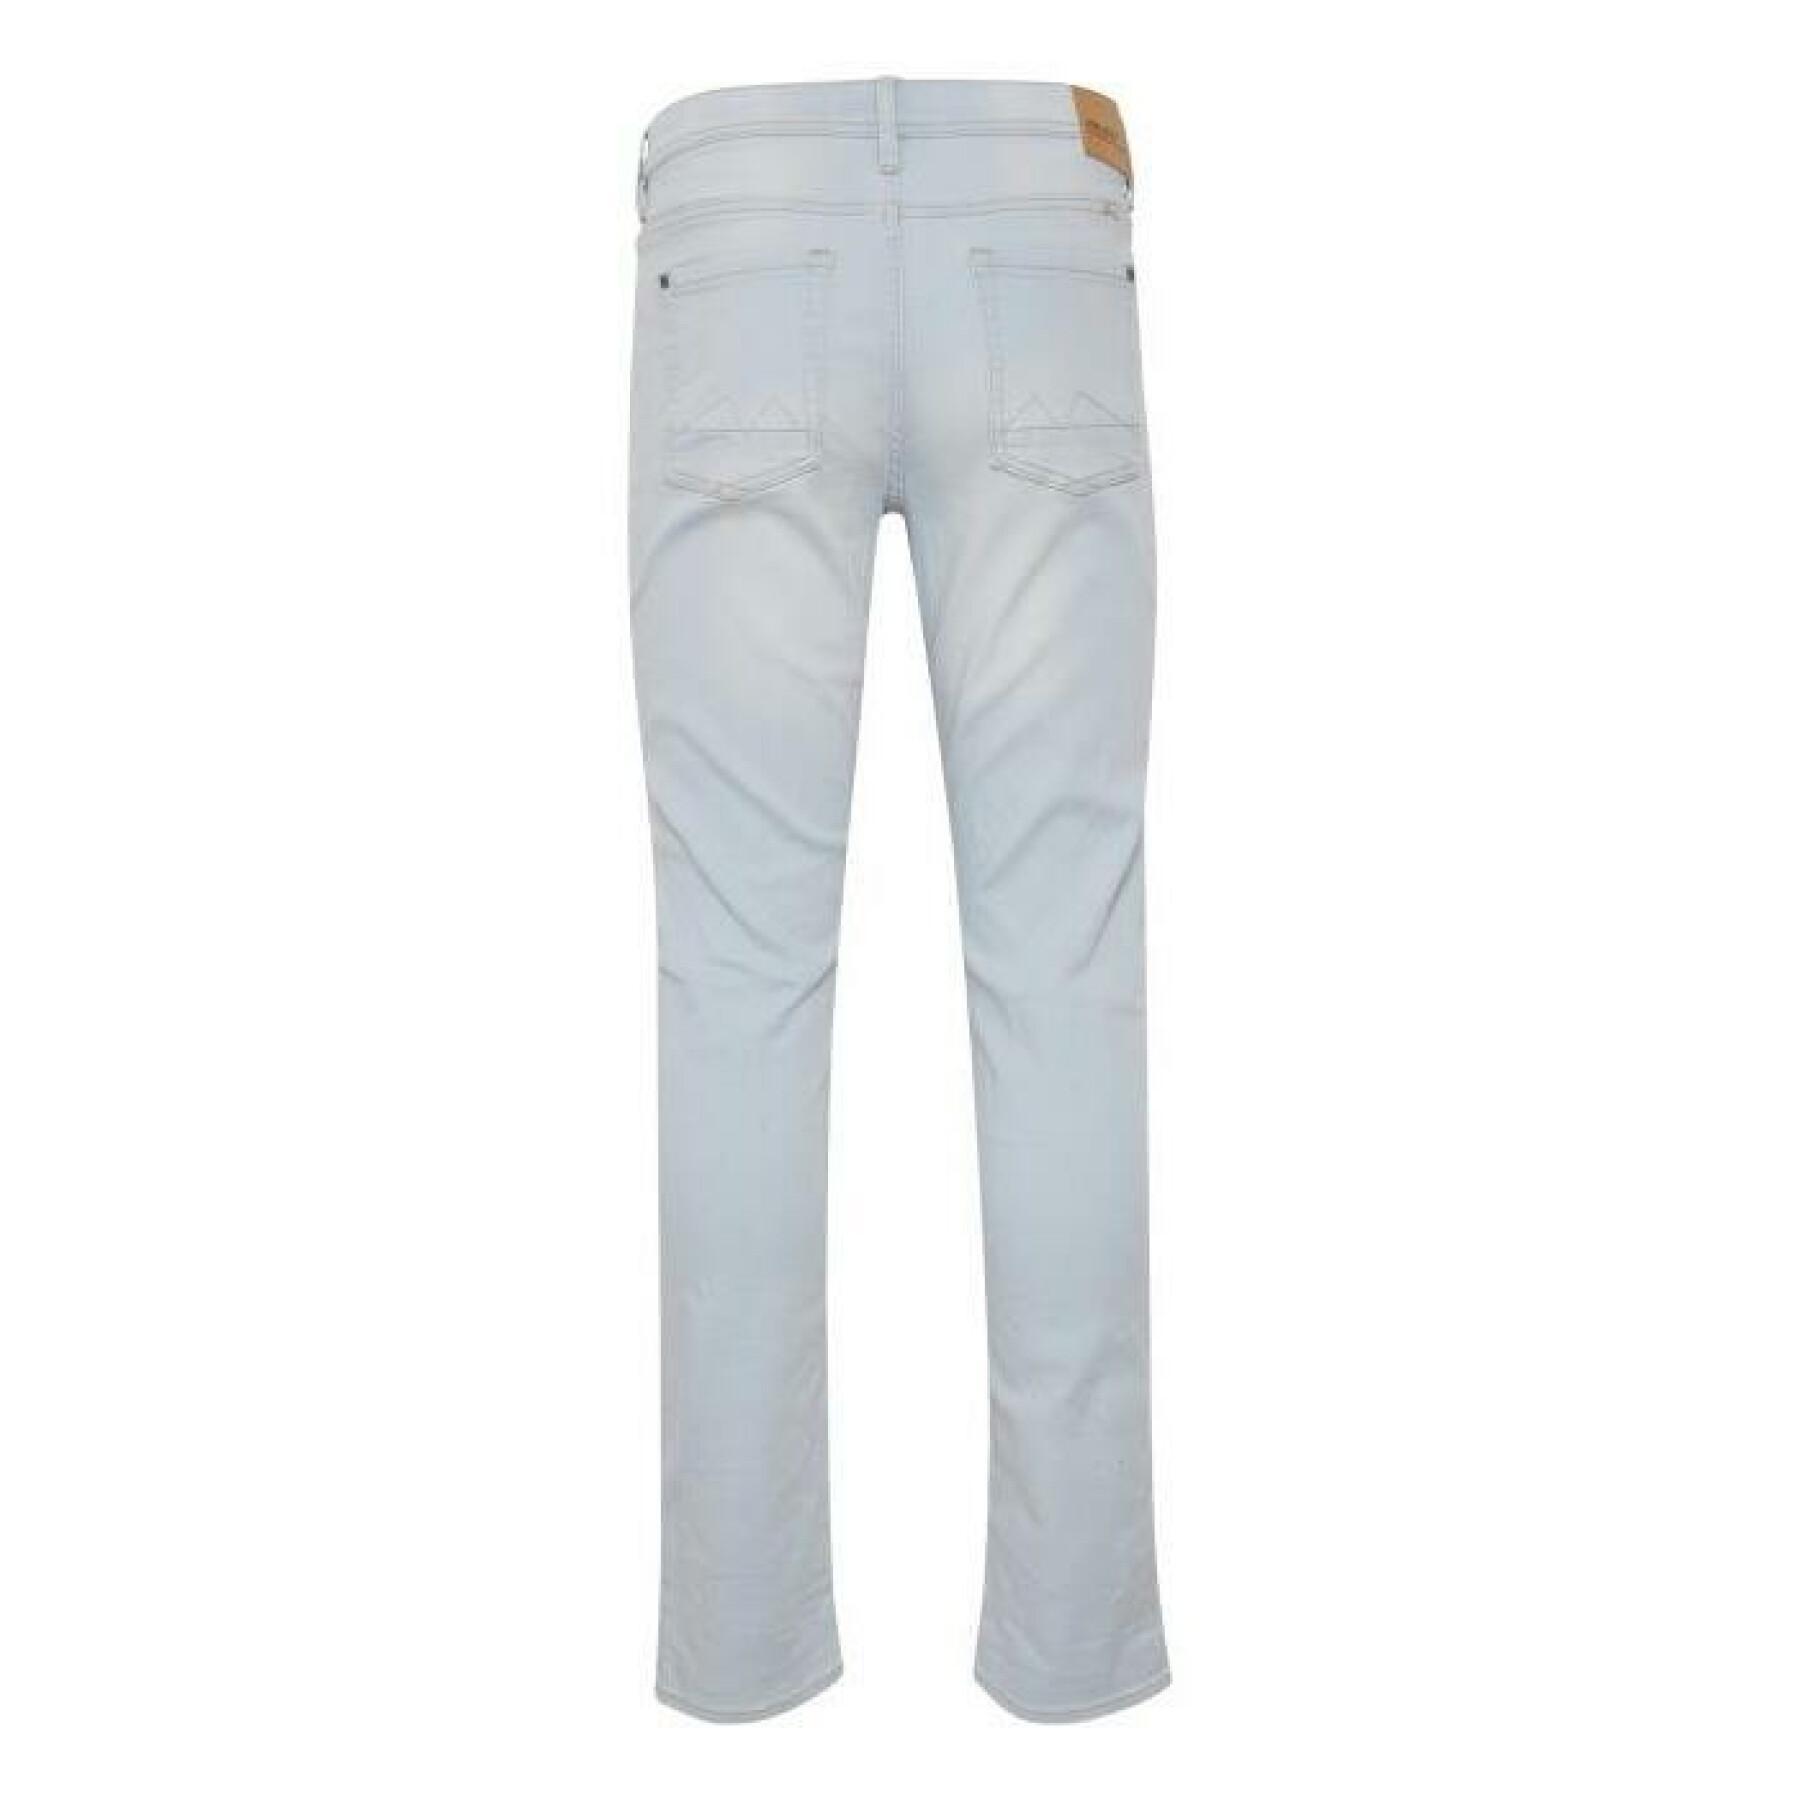 Damskie jeansy tapered Blend Jogg - Twister